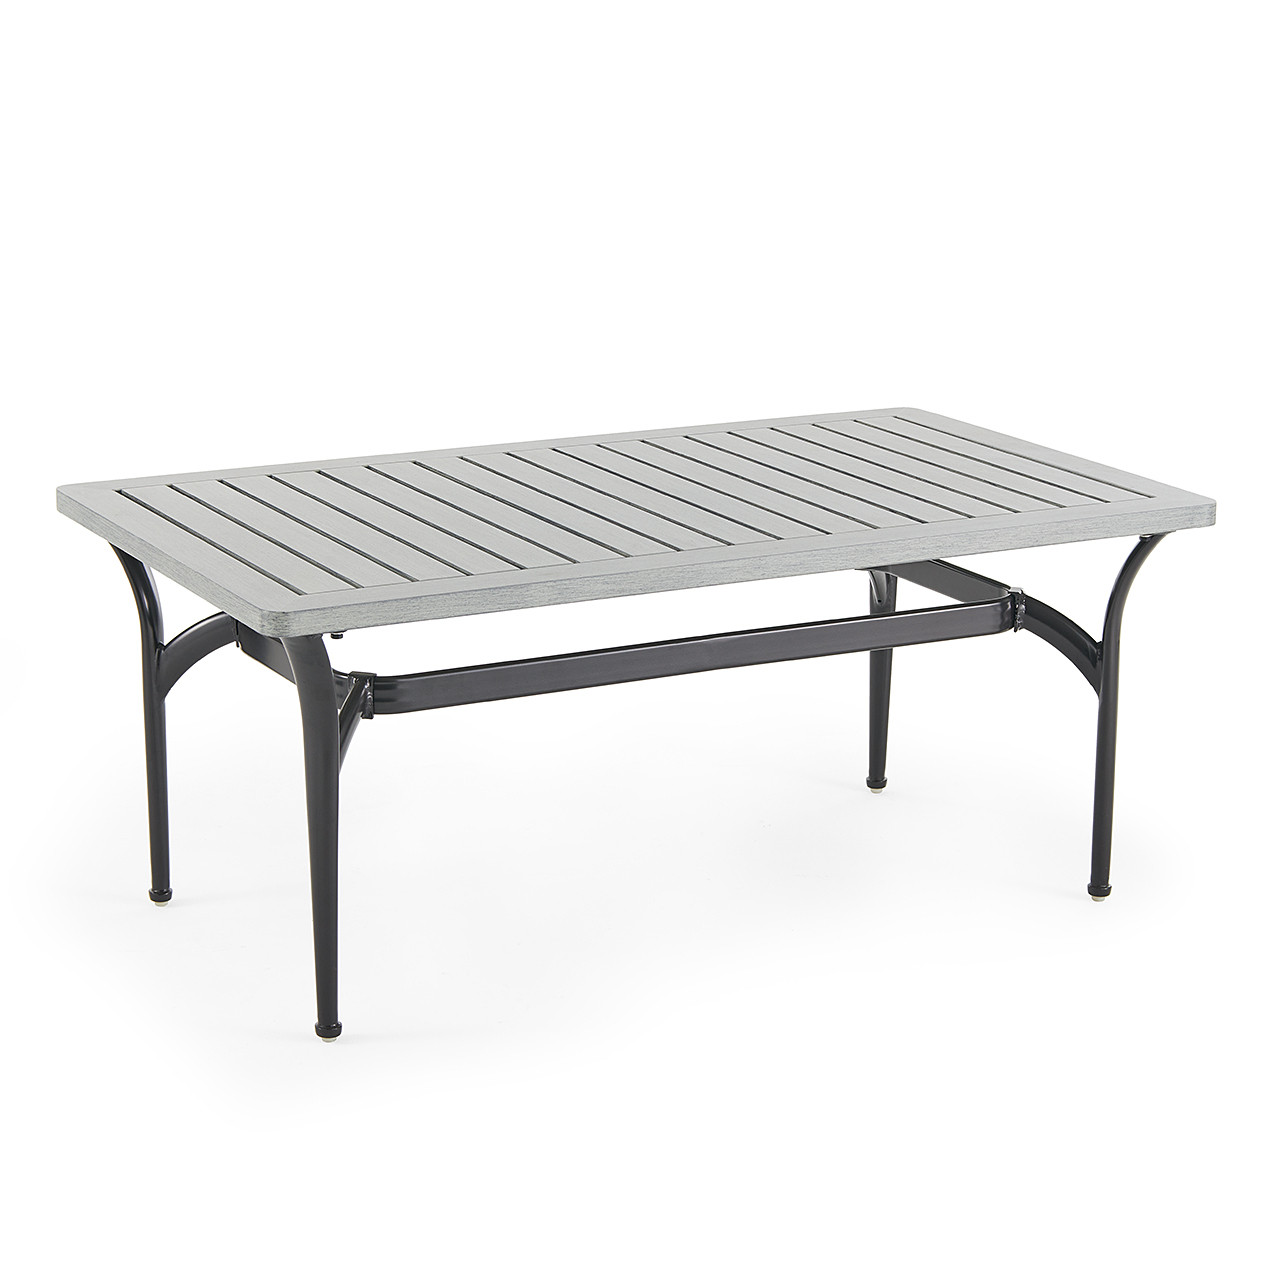 Metro Meteor Aluminum with Cushions 4 Pc. Sofa Group + Swivel Club Chairs + 52 x 30 in. Slat Top Coffee Table